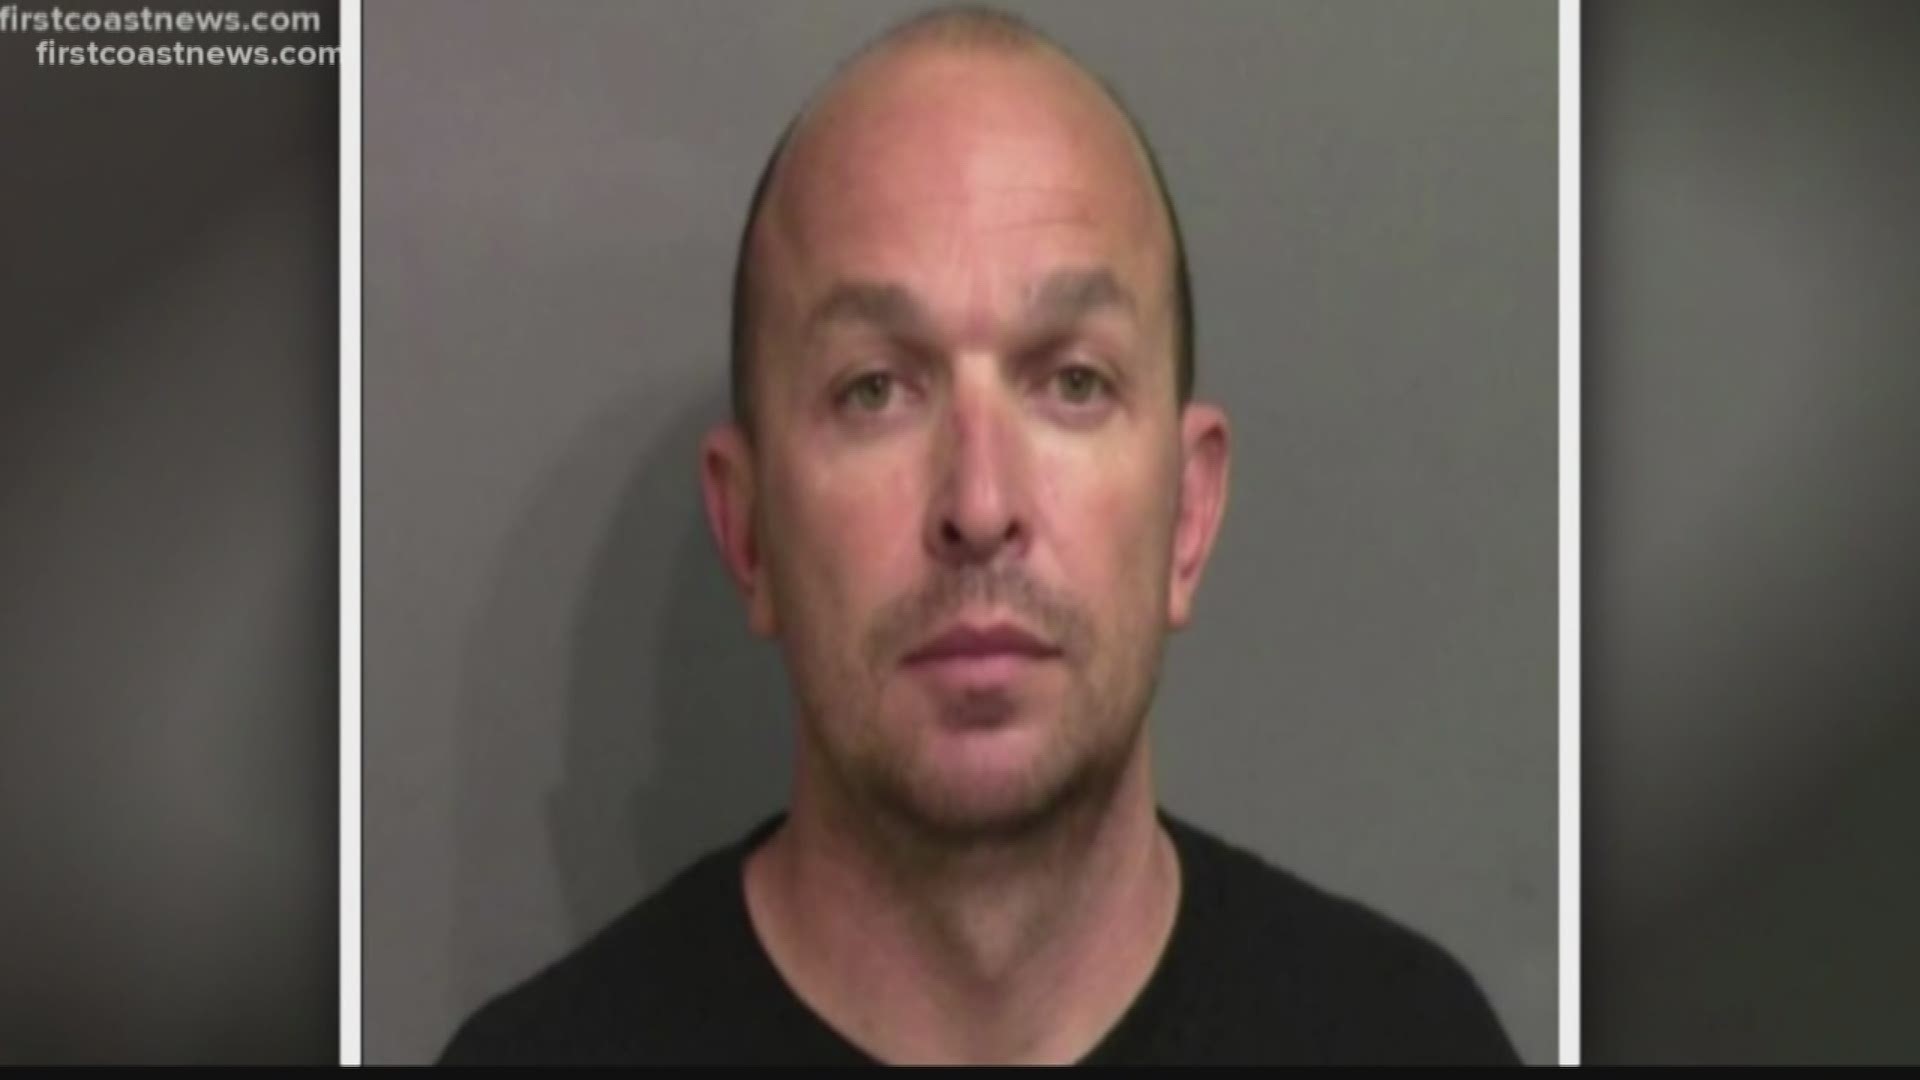 On Monday, Lt. Robert "Corey" Sasser, 41, was arrested after he turned himself into police following an alleged domestic incident in Brunswick, Georgia with his wife last weekend. Thursday, police learned he violated the condition of his bond.